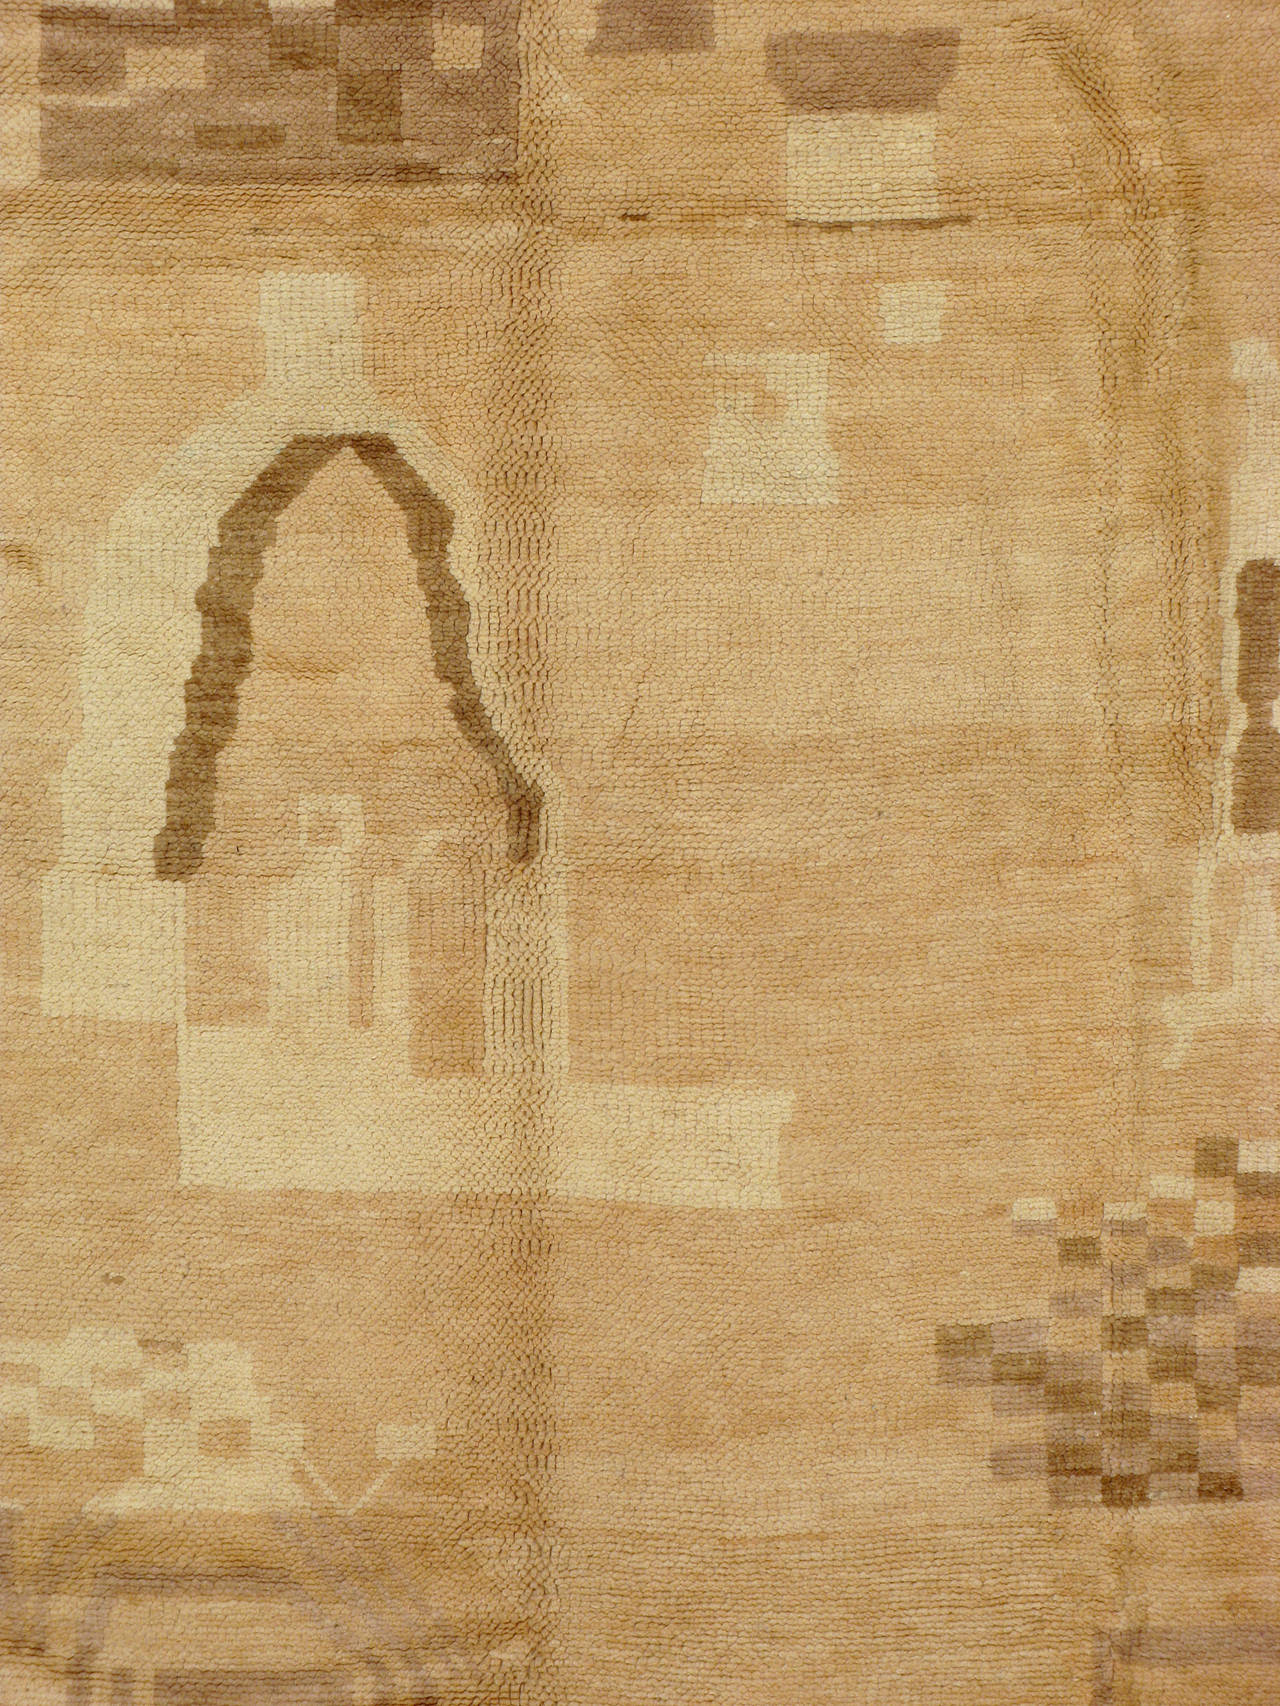 A Mid-Century Moroccan rug in a pallet of tone-on-tone hues.